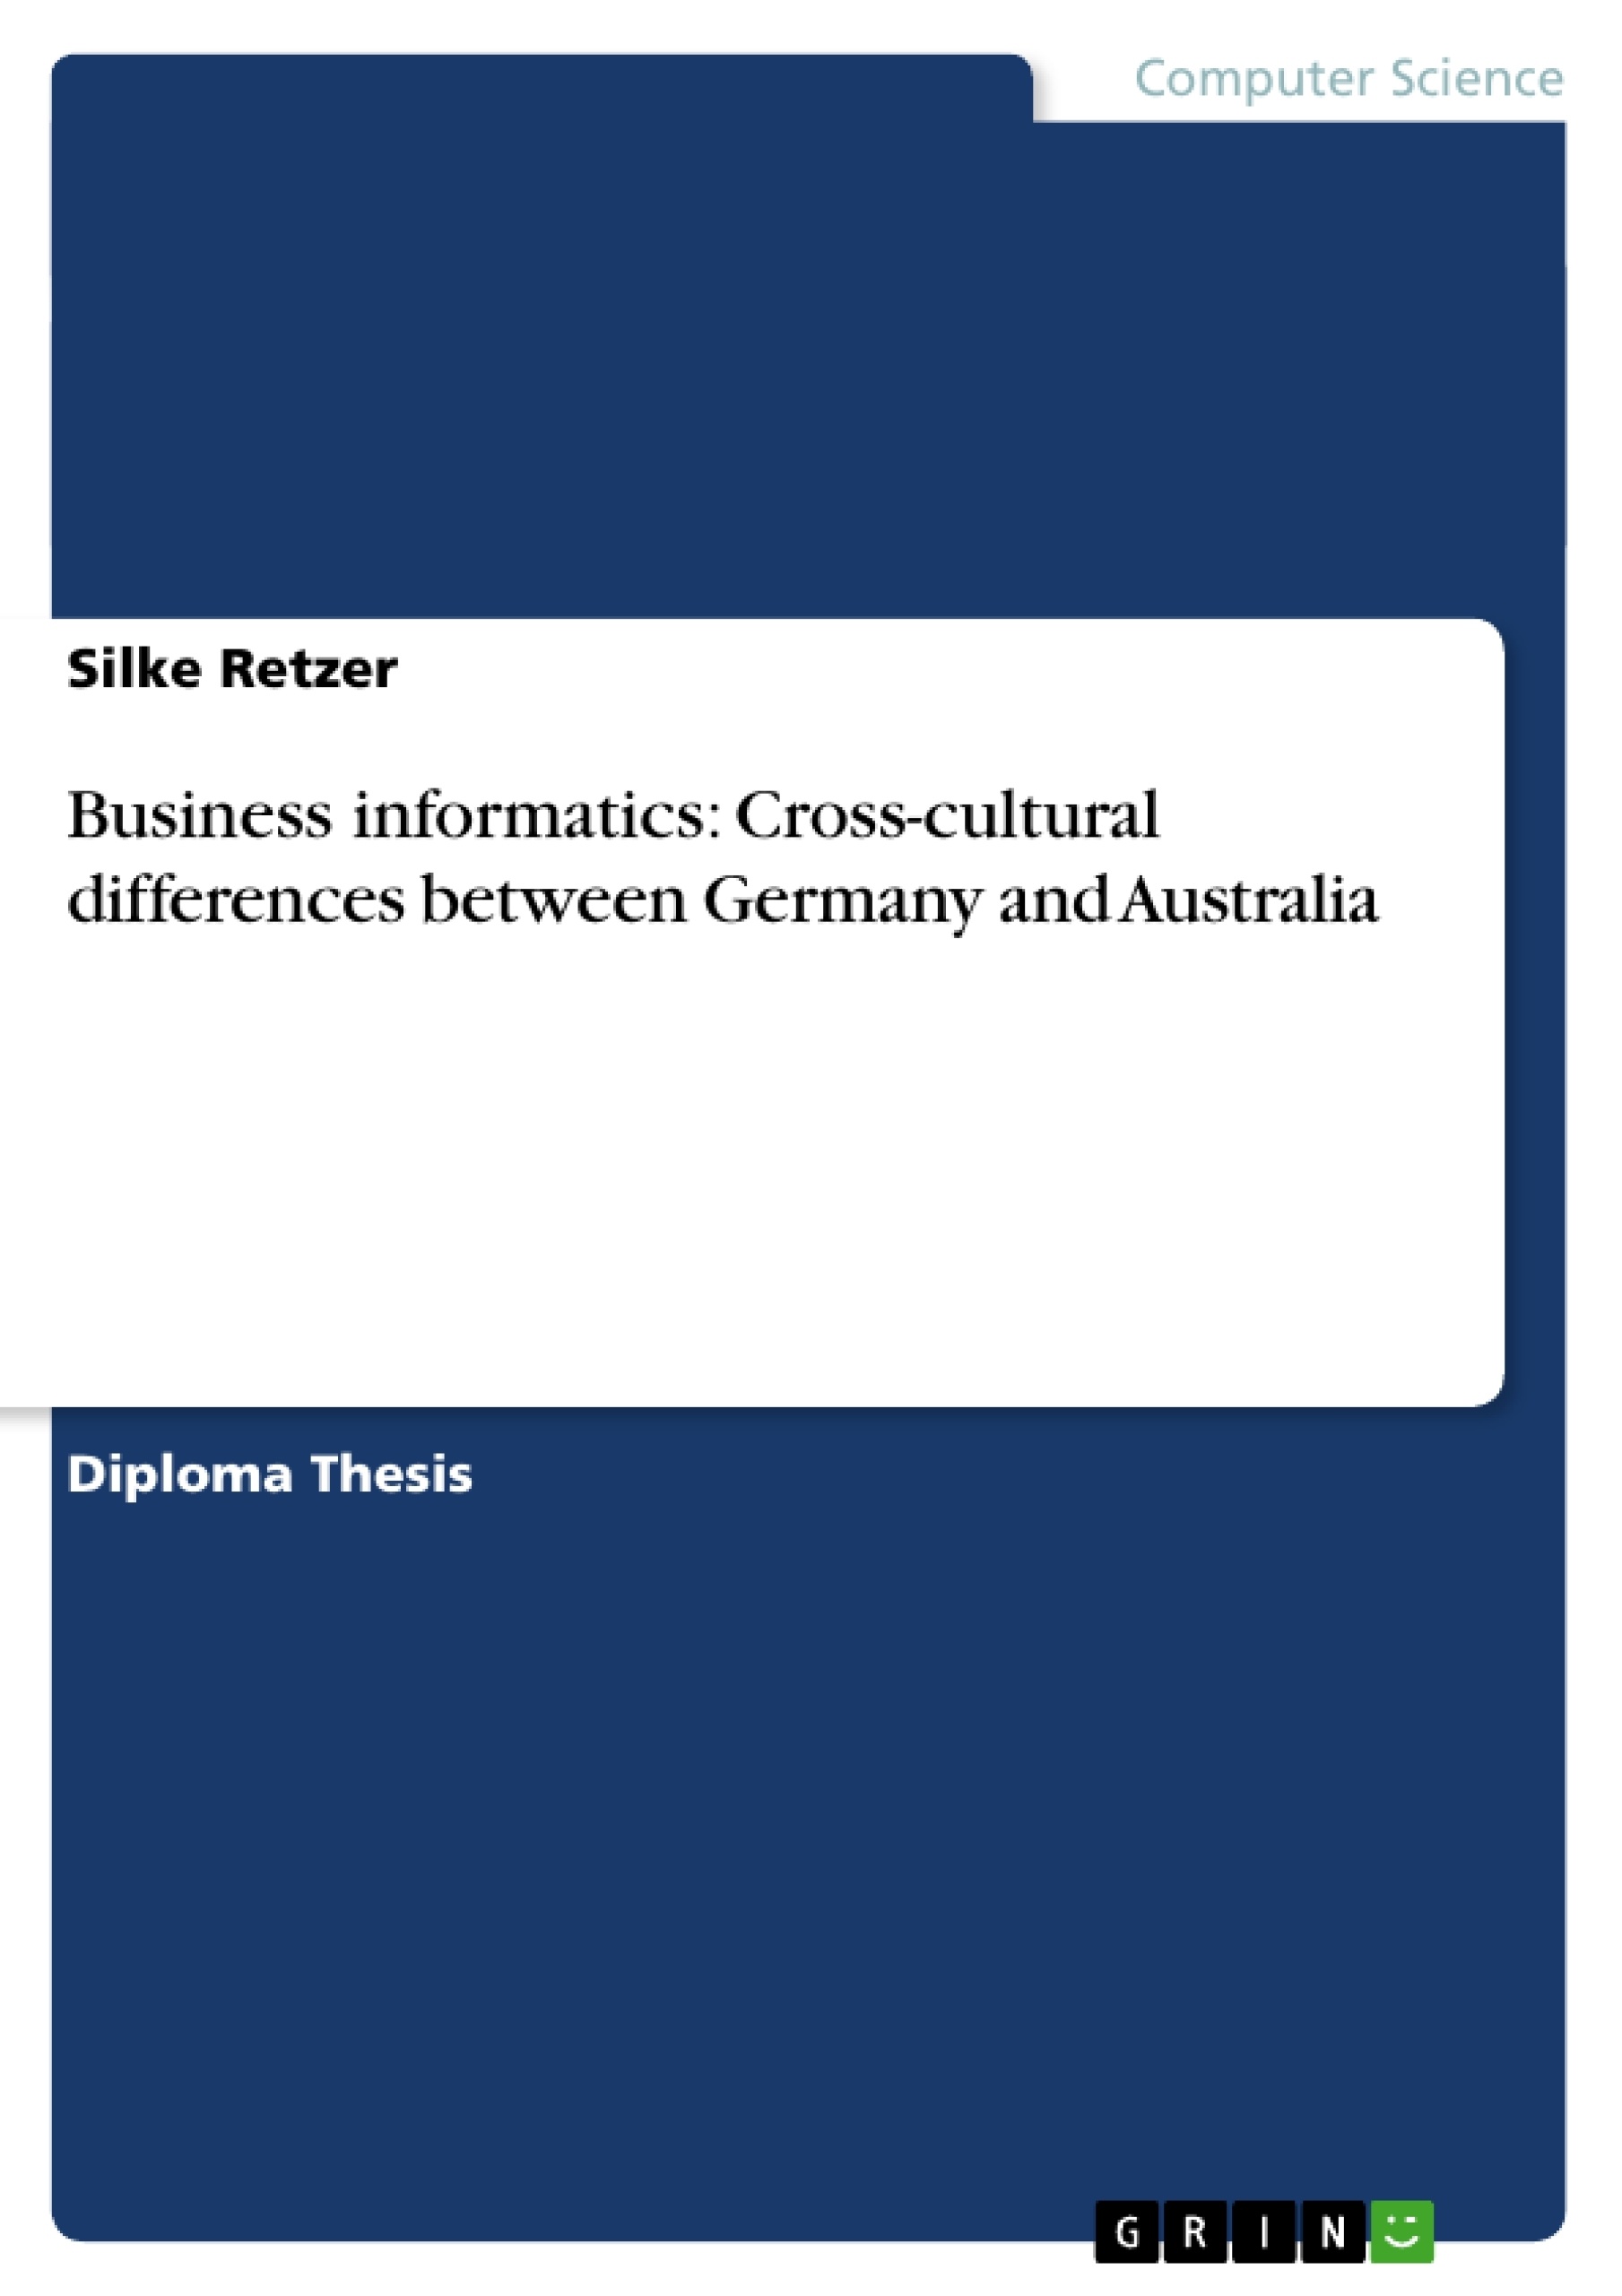 Title: Business informatics: Cross-cultural differences between Germany and Australia